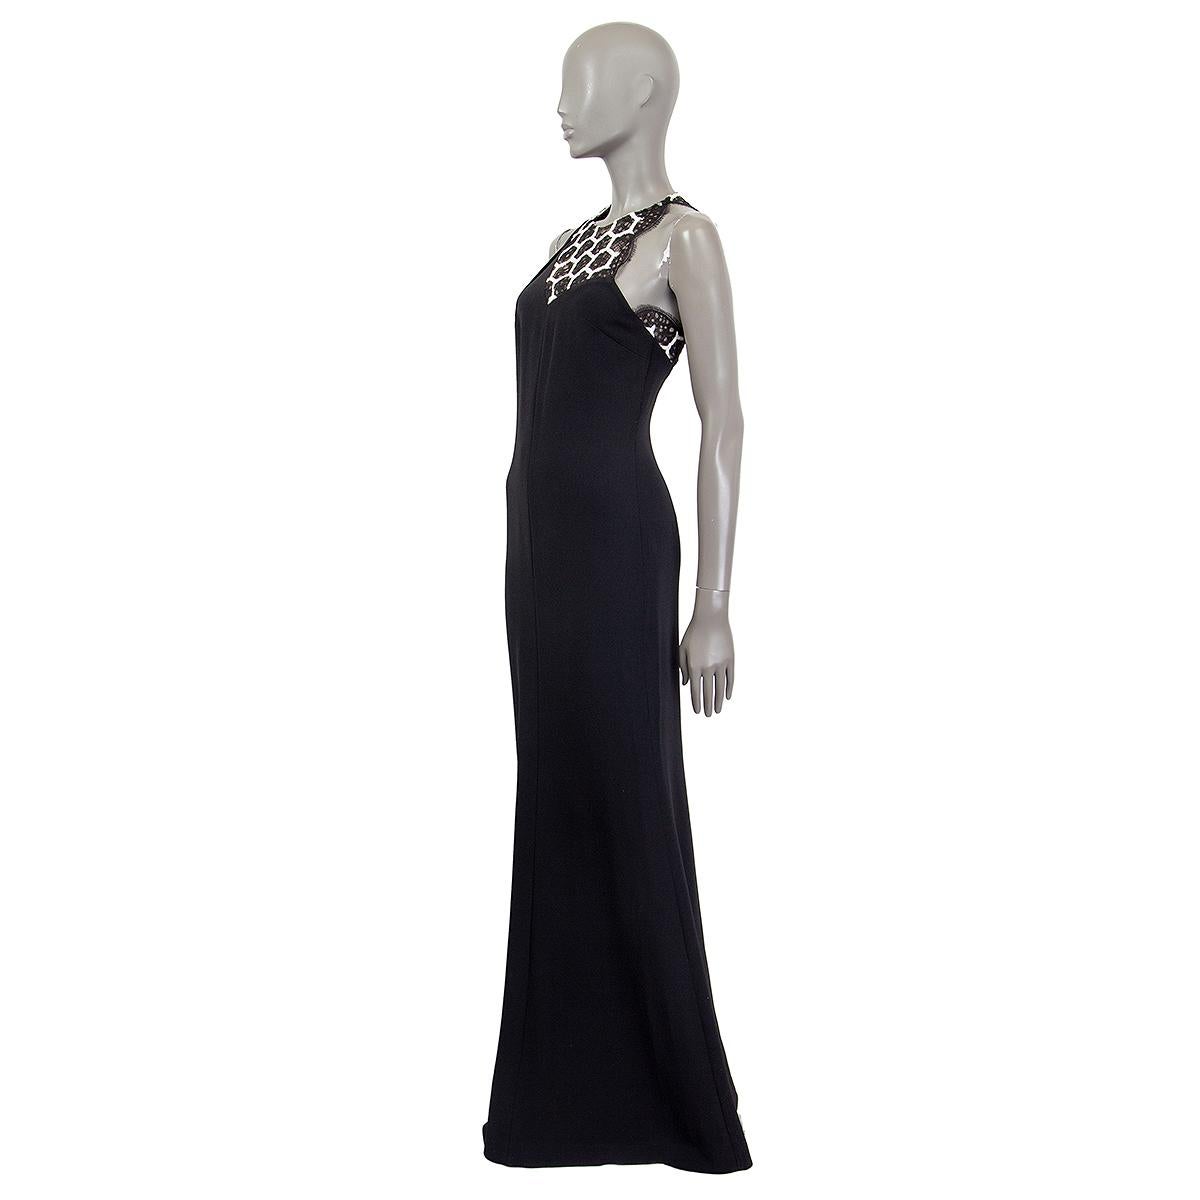 100% authentic Roland Mouret sleeveless maxi dress in black viscose (36%), acetate (35%), nylon (26%) and elastane (3%) with embroidered lace panel in black and white. Opens with a zipper in the back. Lined in acetate (68%) and polyerster (32%). Has